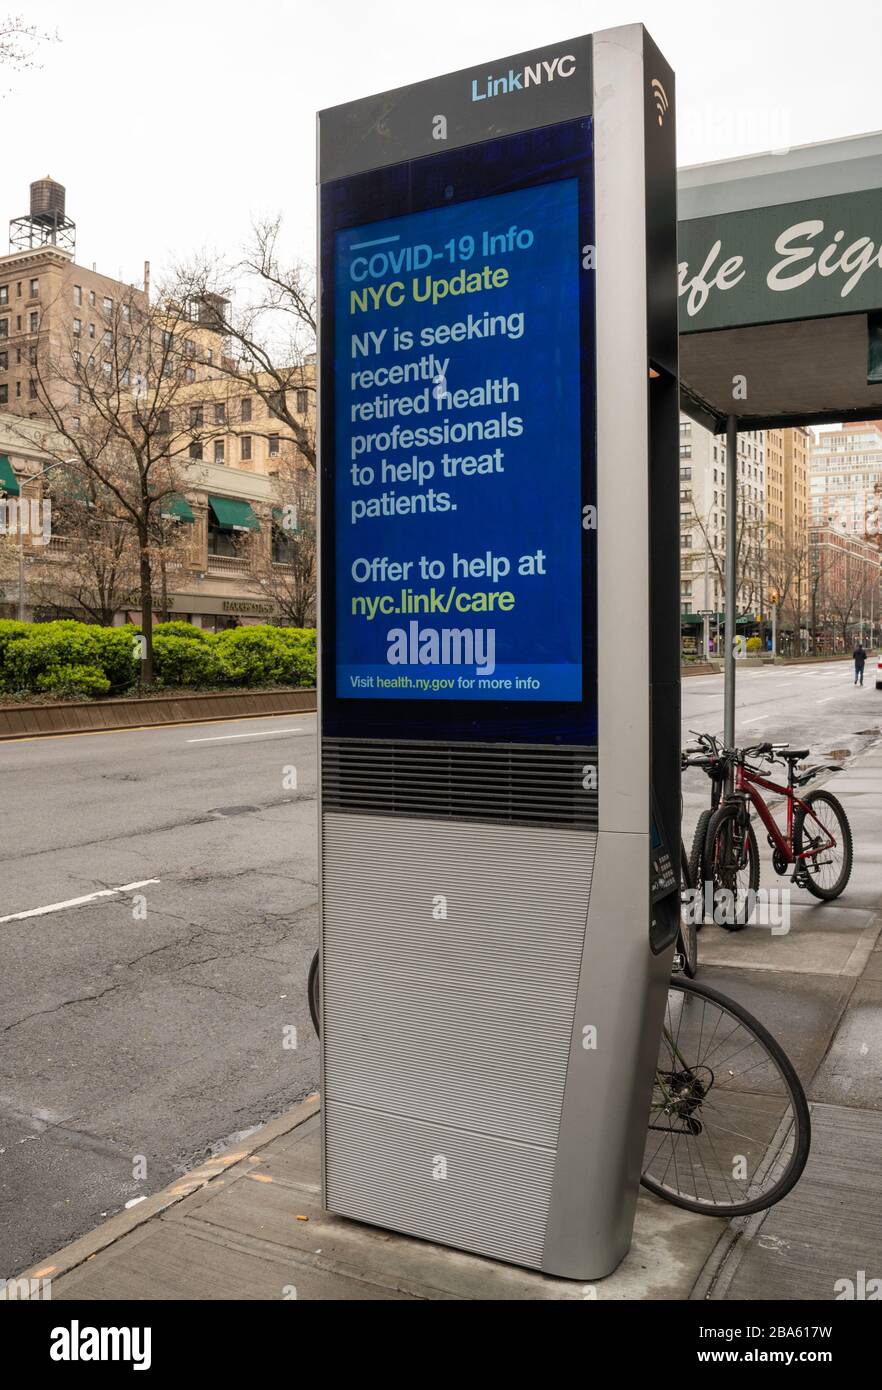 NEW YORK, NY - MARCH 25, 2020. Public Service messages about the Coronavirus outbreak are displayed on a LinkNYC kiosk on the Upper West Side of Manhattan in New York City. The World Health Organization declared coronavirus (COVID-19) a global pandemic on March 11th. Stock Photo